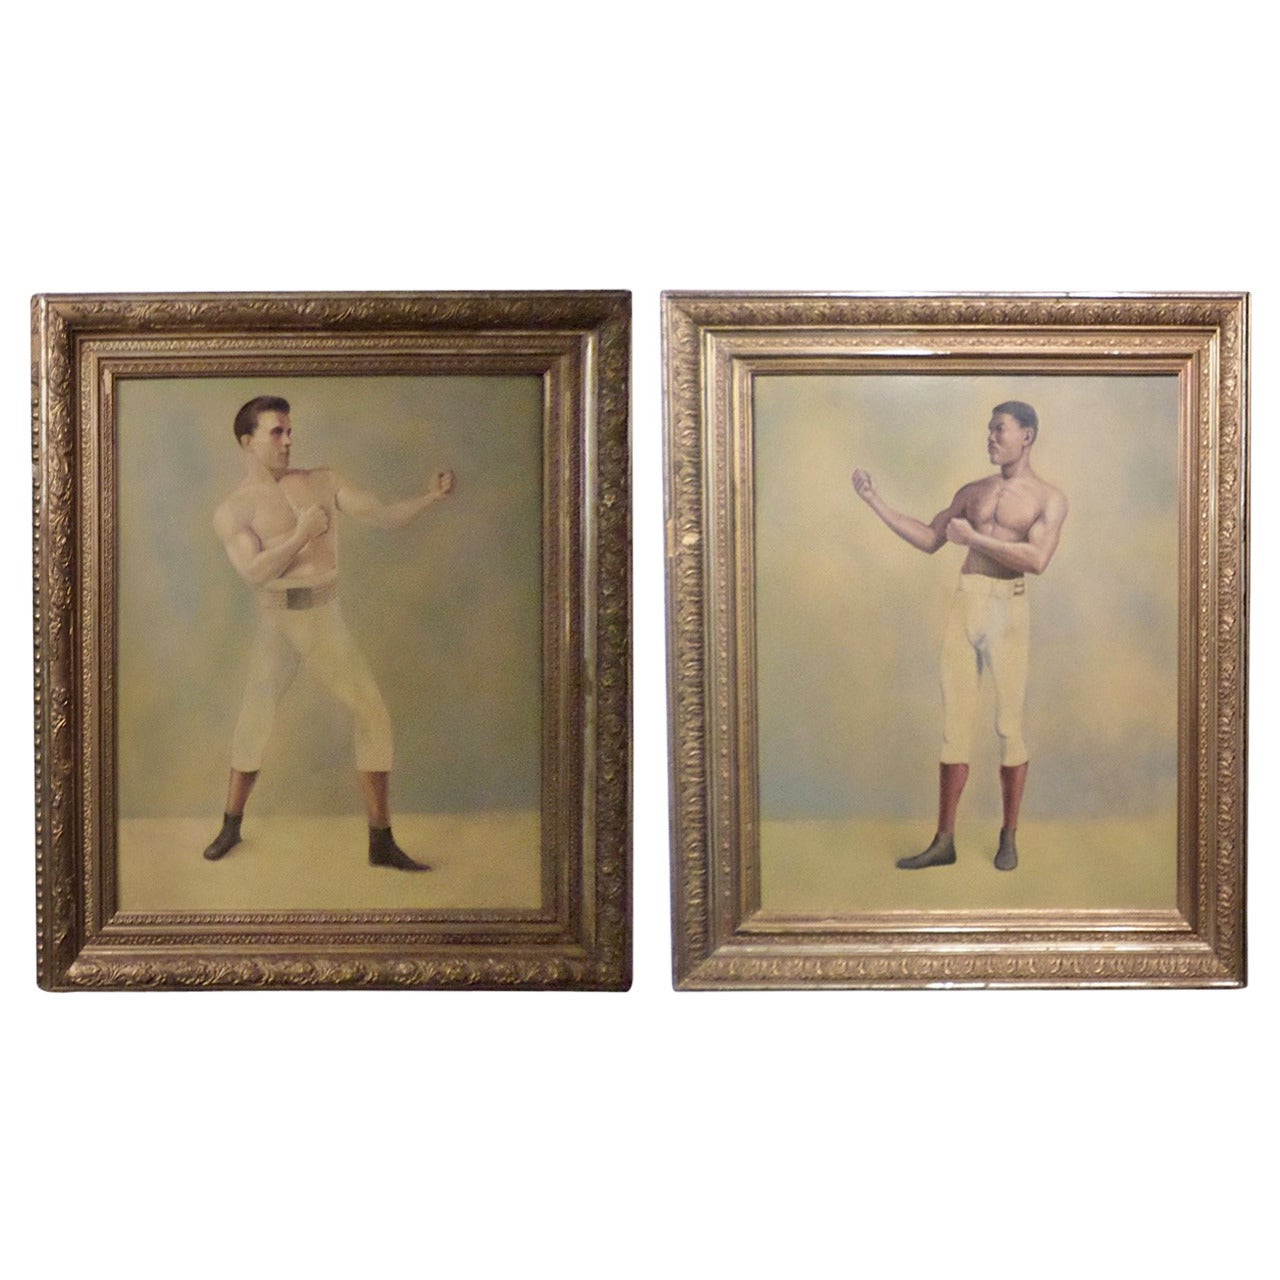 Wonderful Pair of Portraits of Athletic Boxers